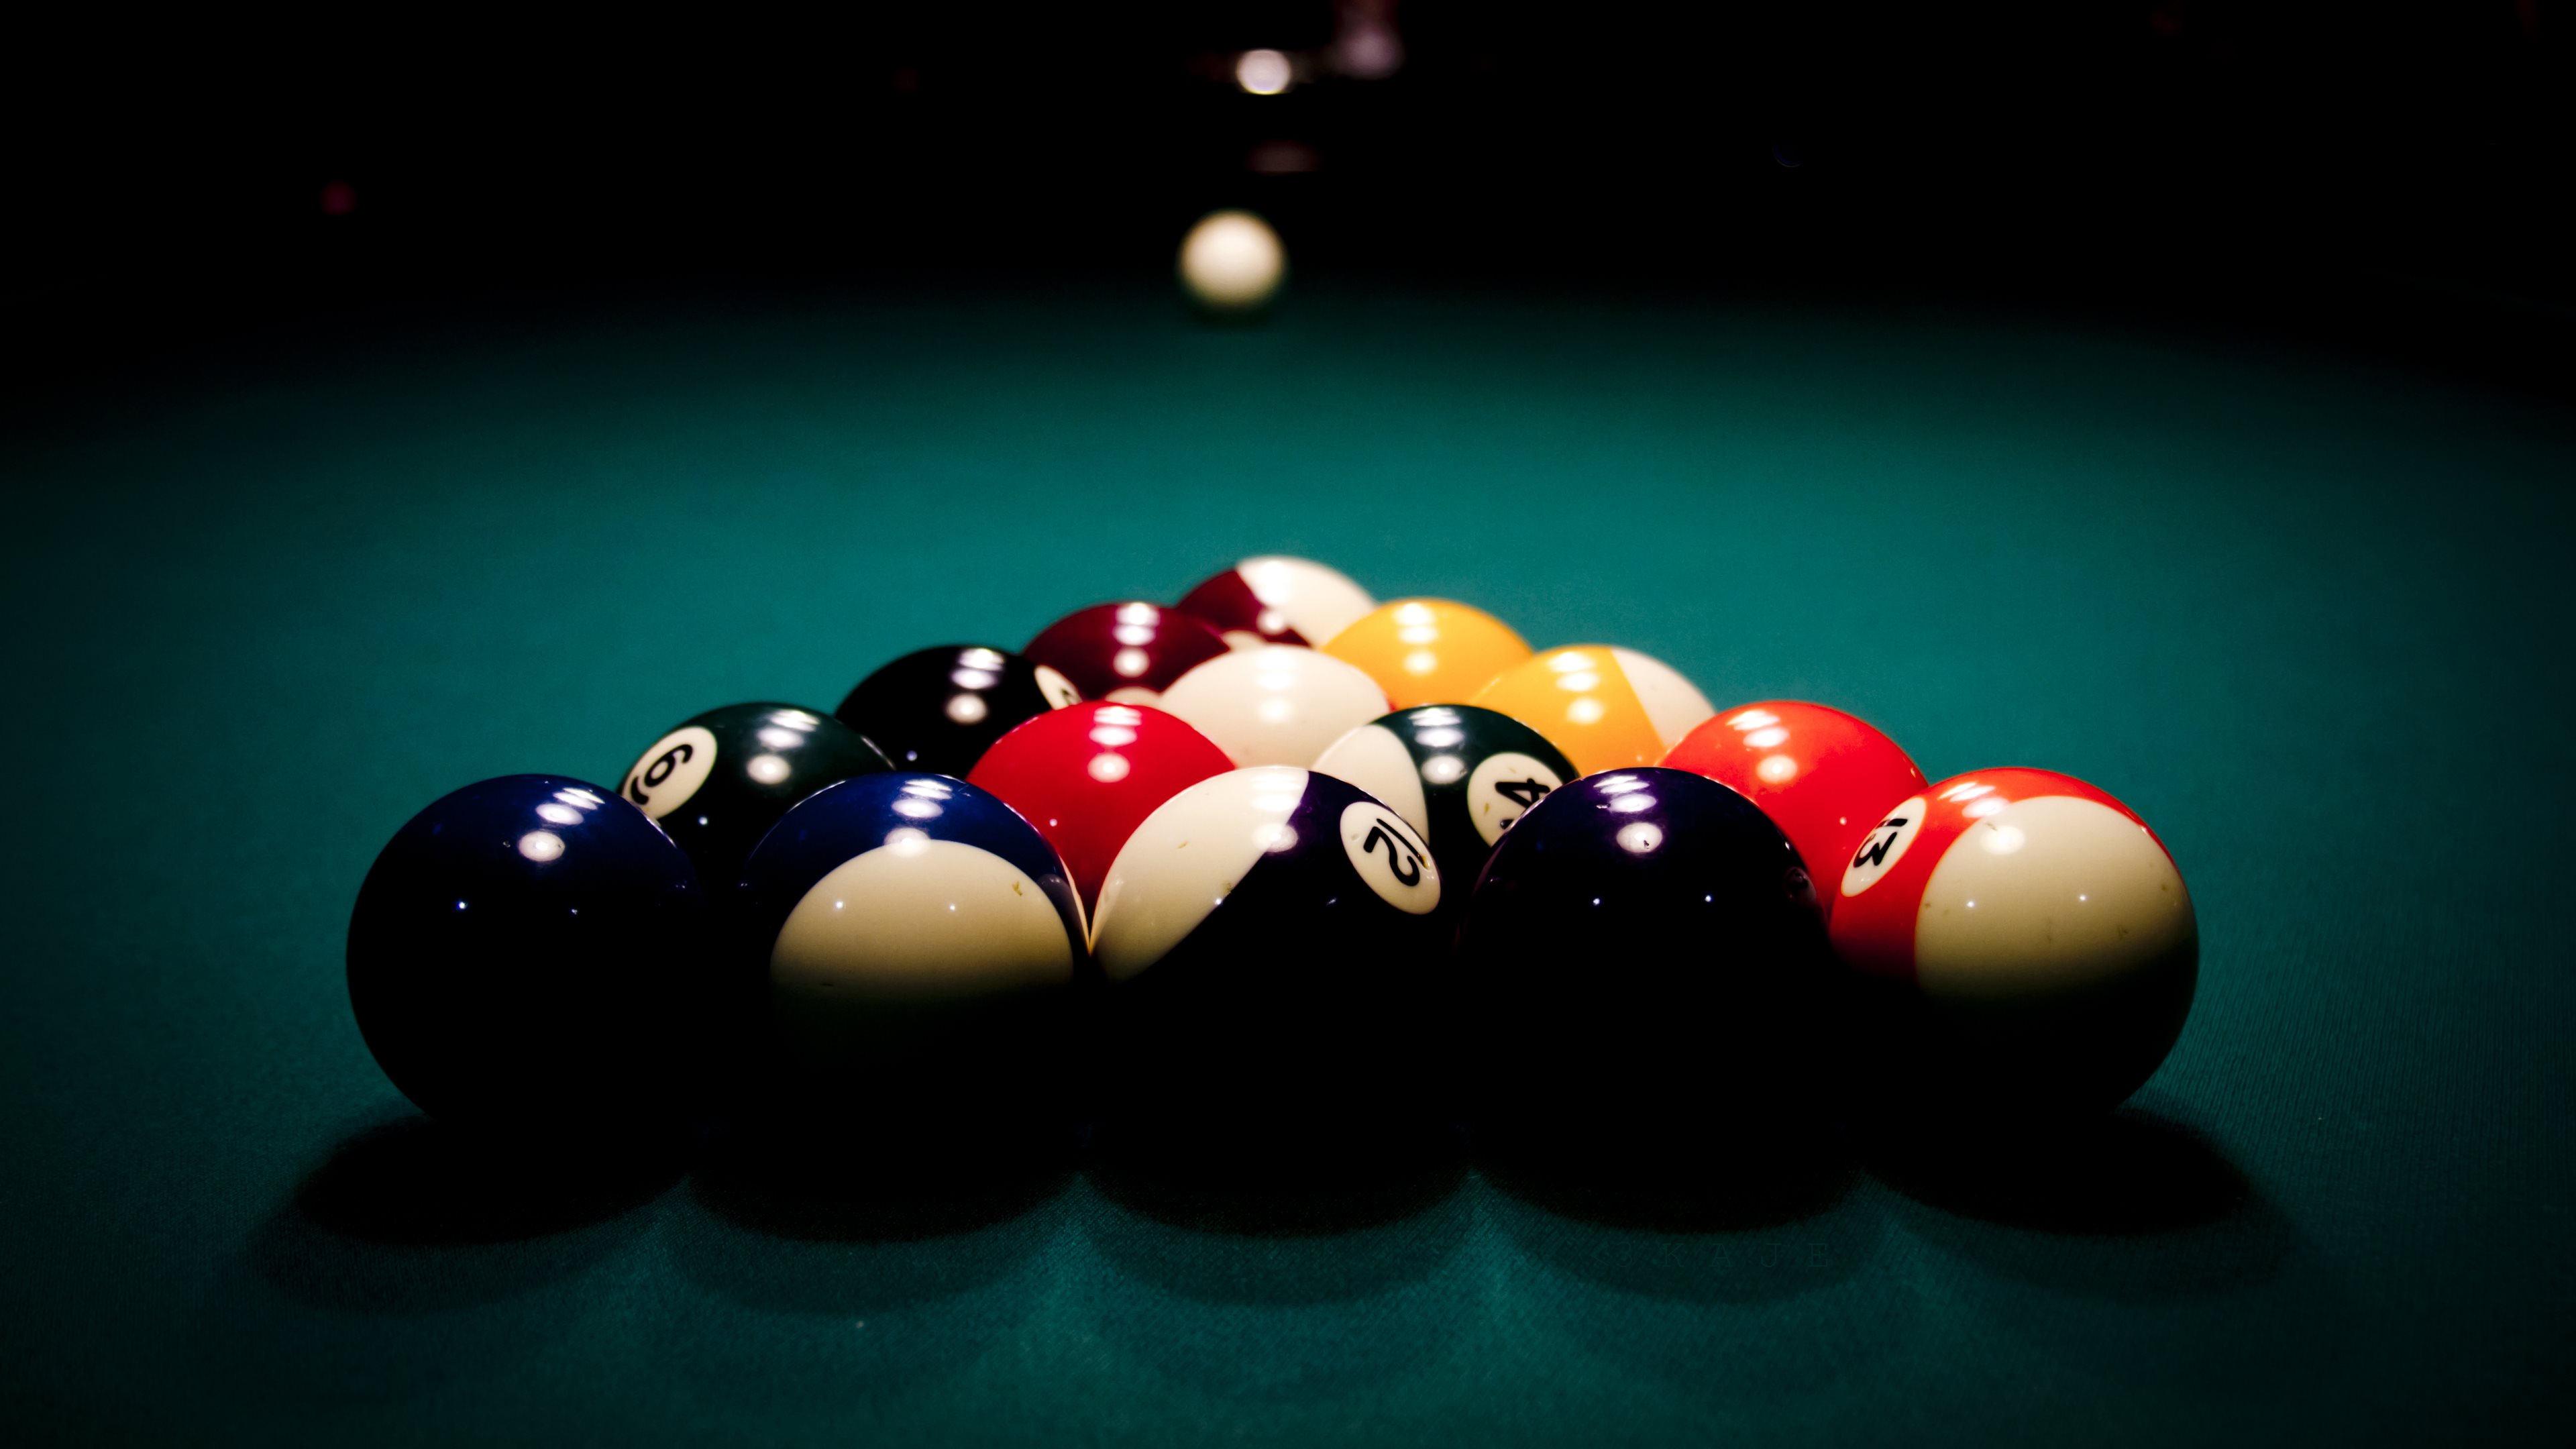 Snooker And Pool Wallpaper HD